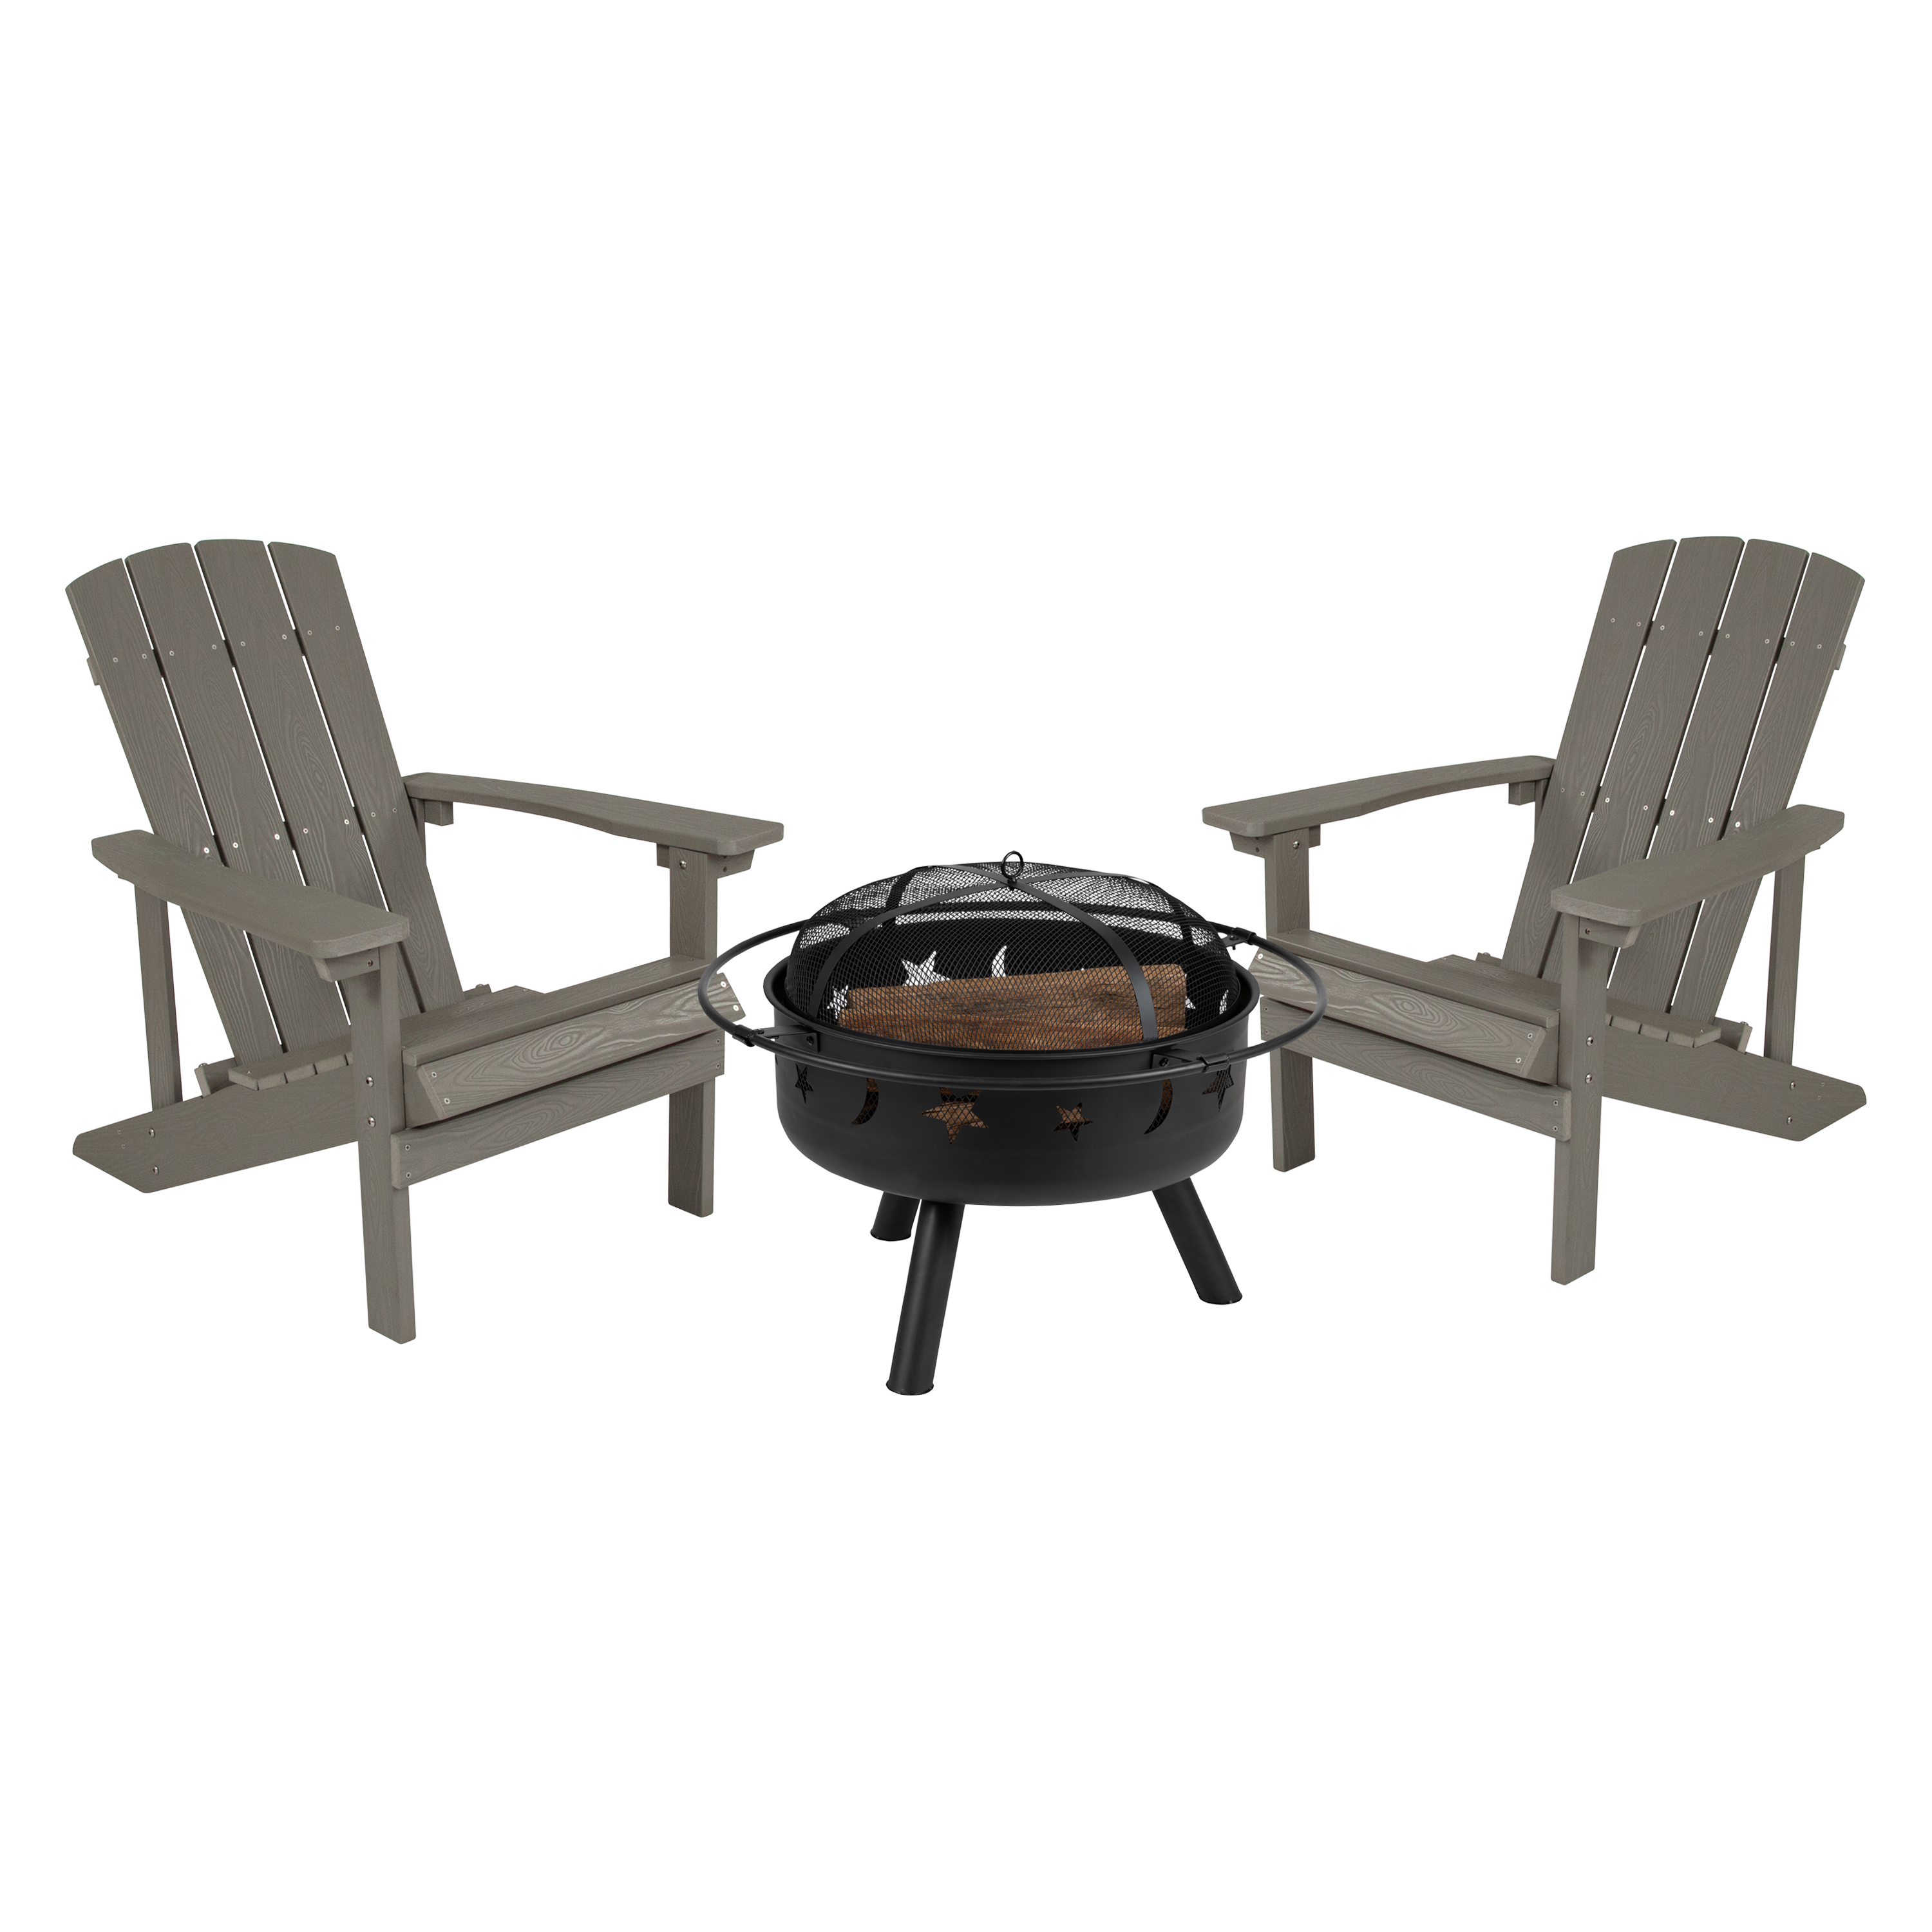 Flash Furniture JJ-C145012-32D-LTG-GG 3 Piece Gray Poly Resin Wood Adirondack Chair Set with Fire Pit